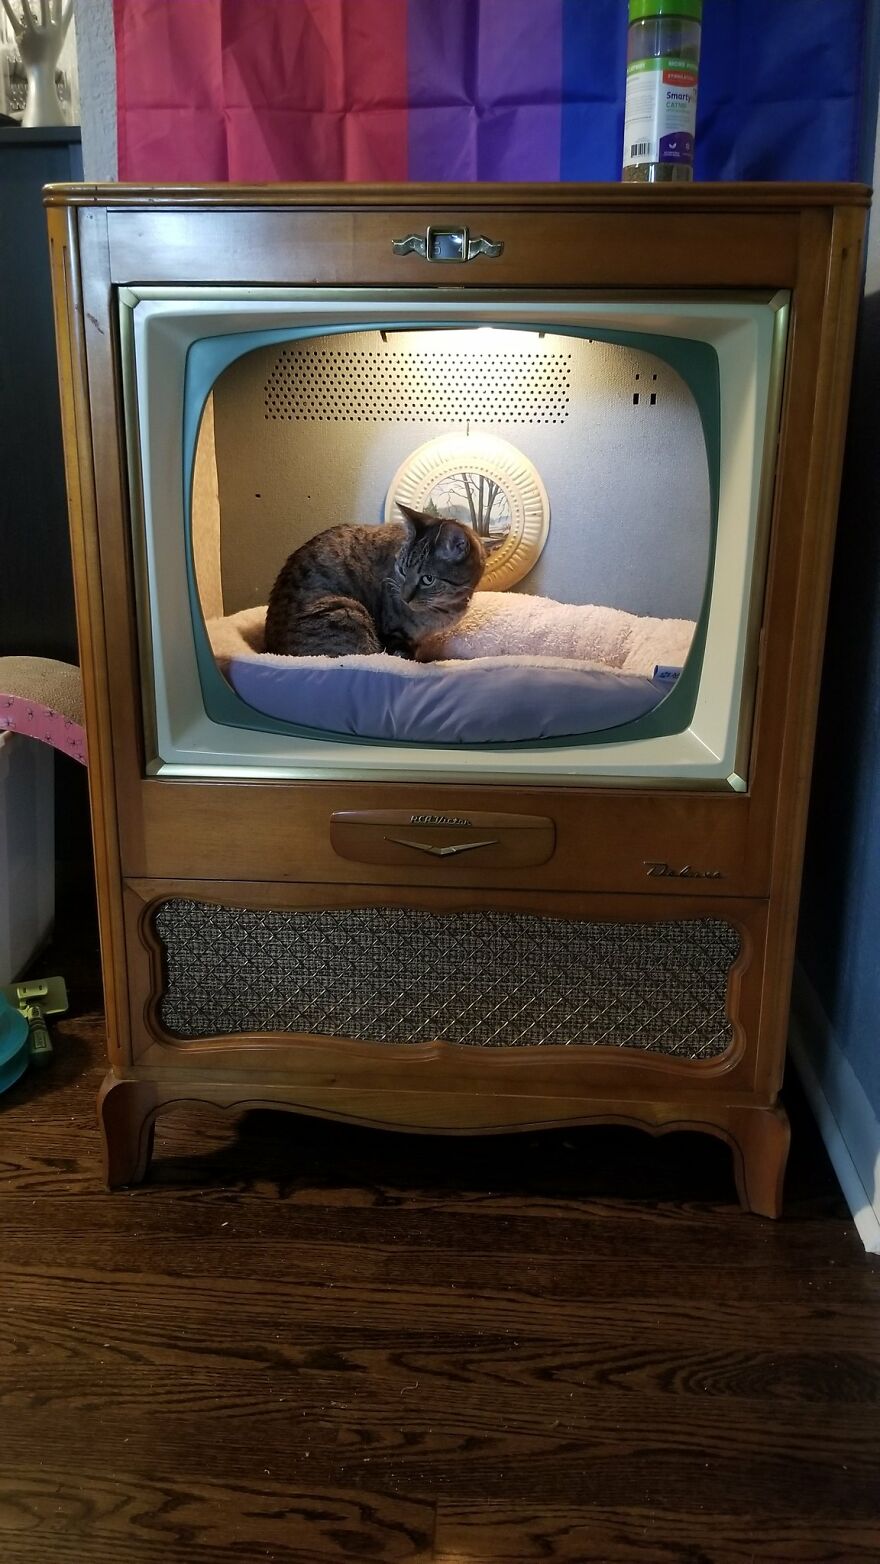 Dad Makes A Cat Bed For His Daughter's Feline From An Old TV, And It Hasn't Gone Unnoticed On The Socials